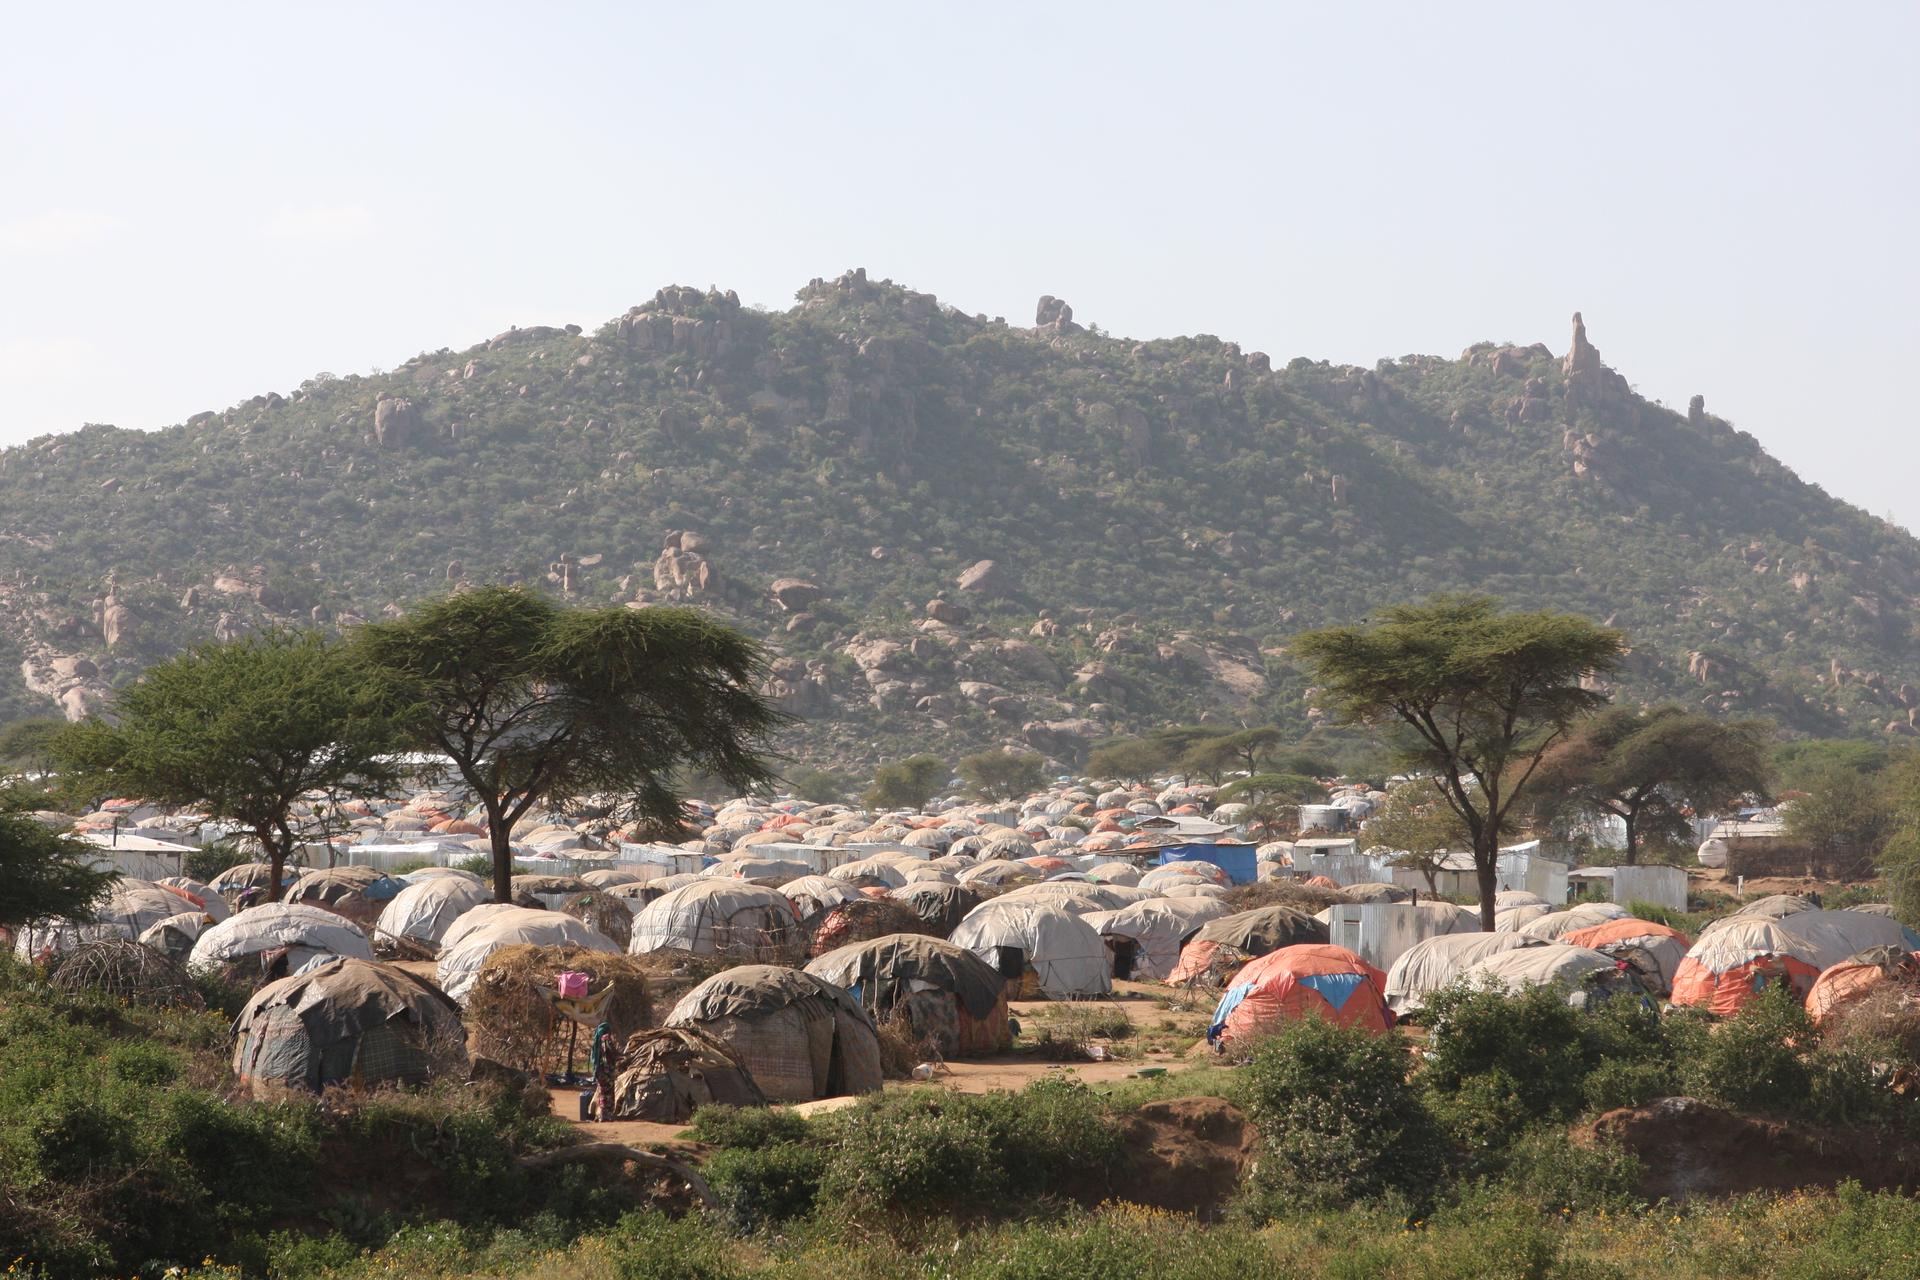 The camps for displaced Somali in the lee of the Kolenchi hills in the Ethiopia's Somali region.